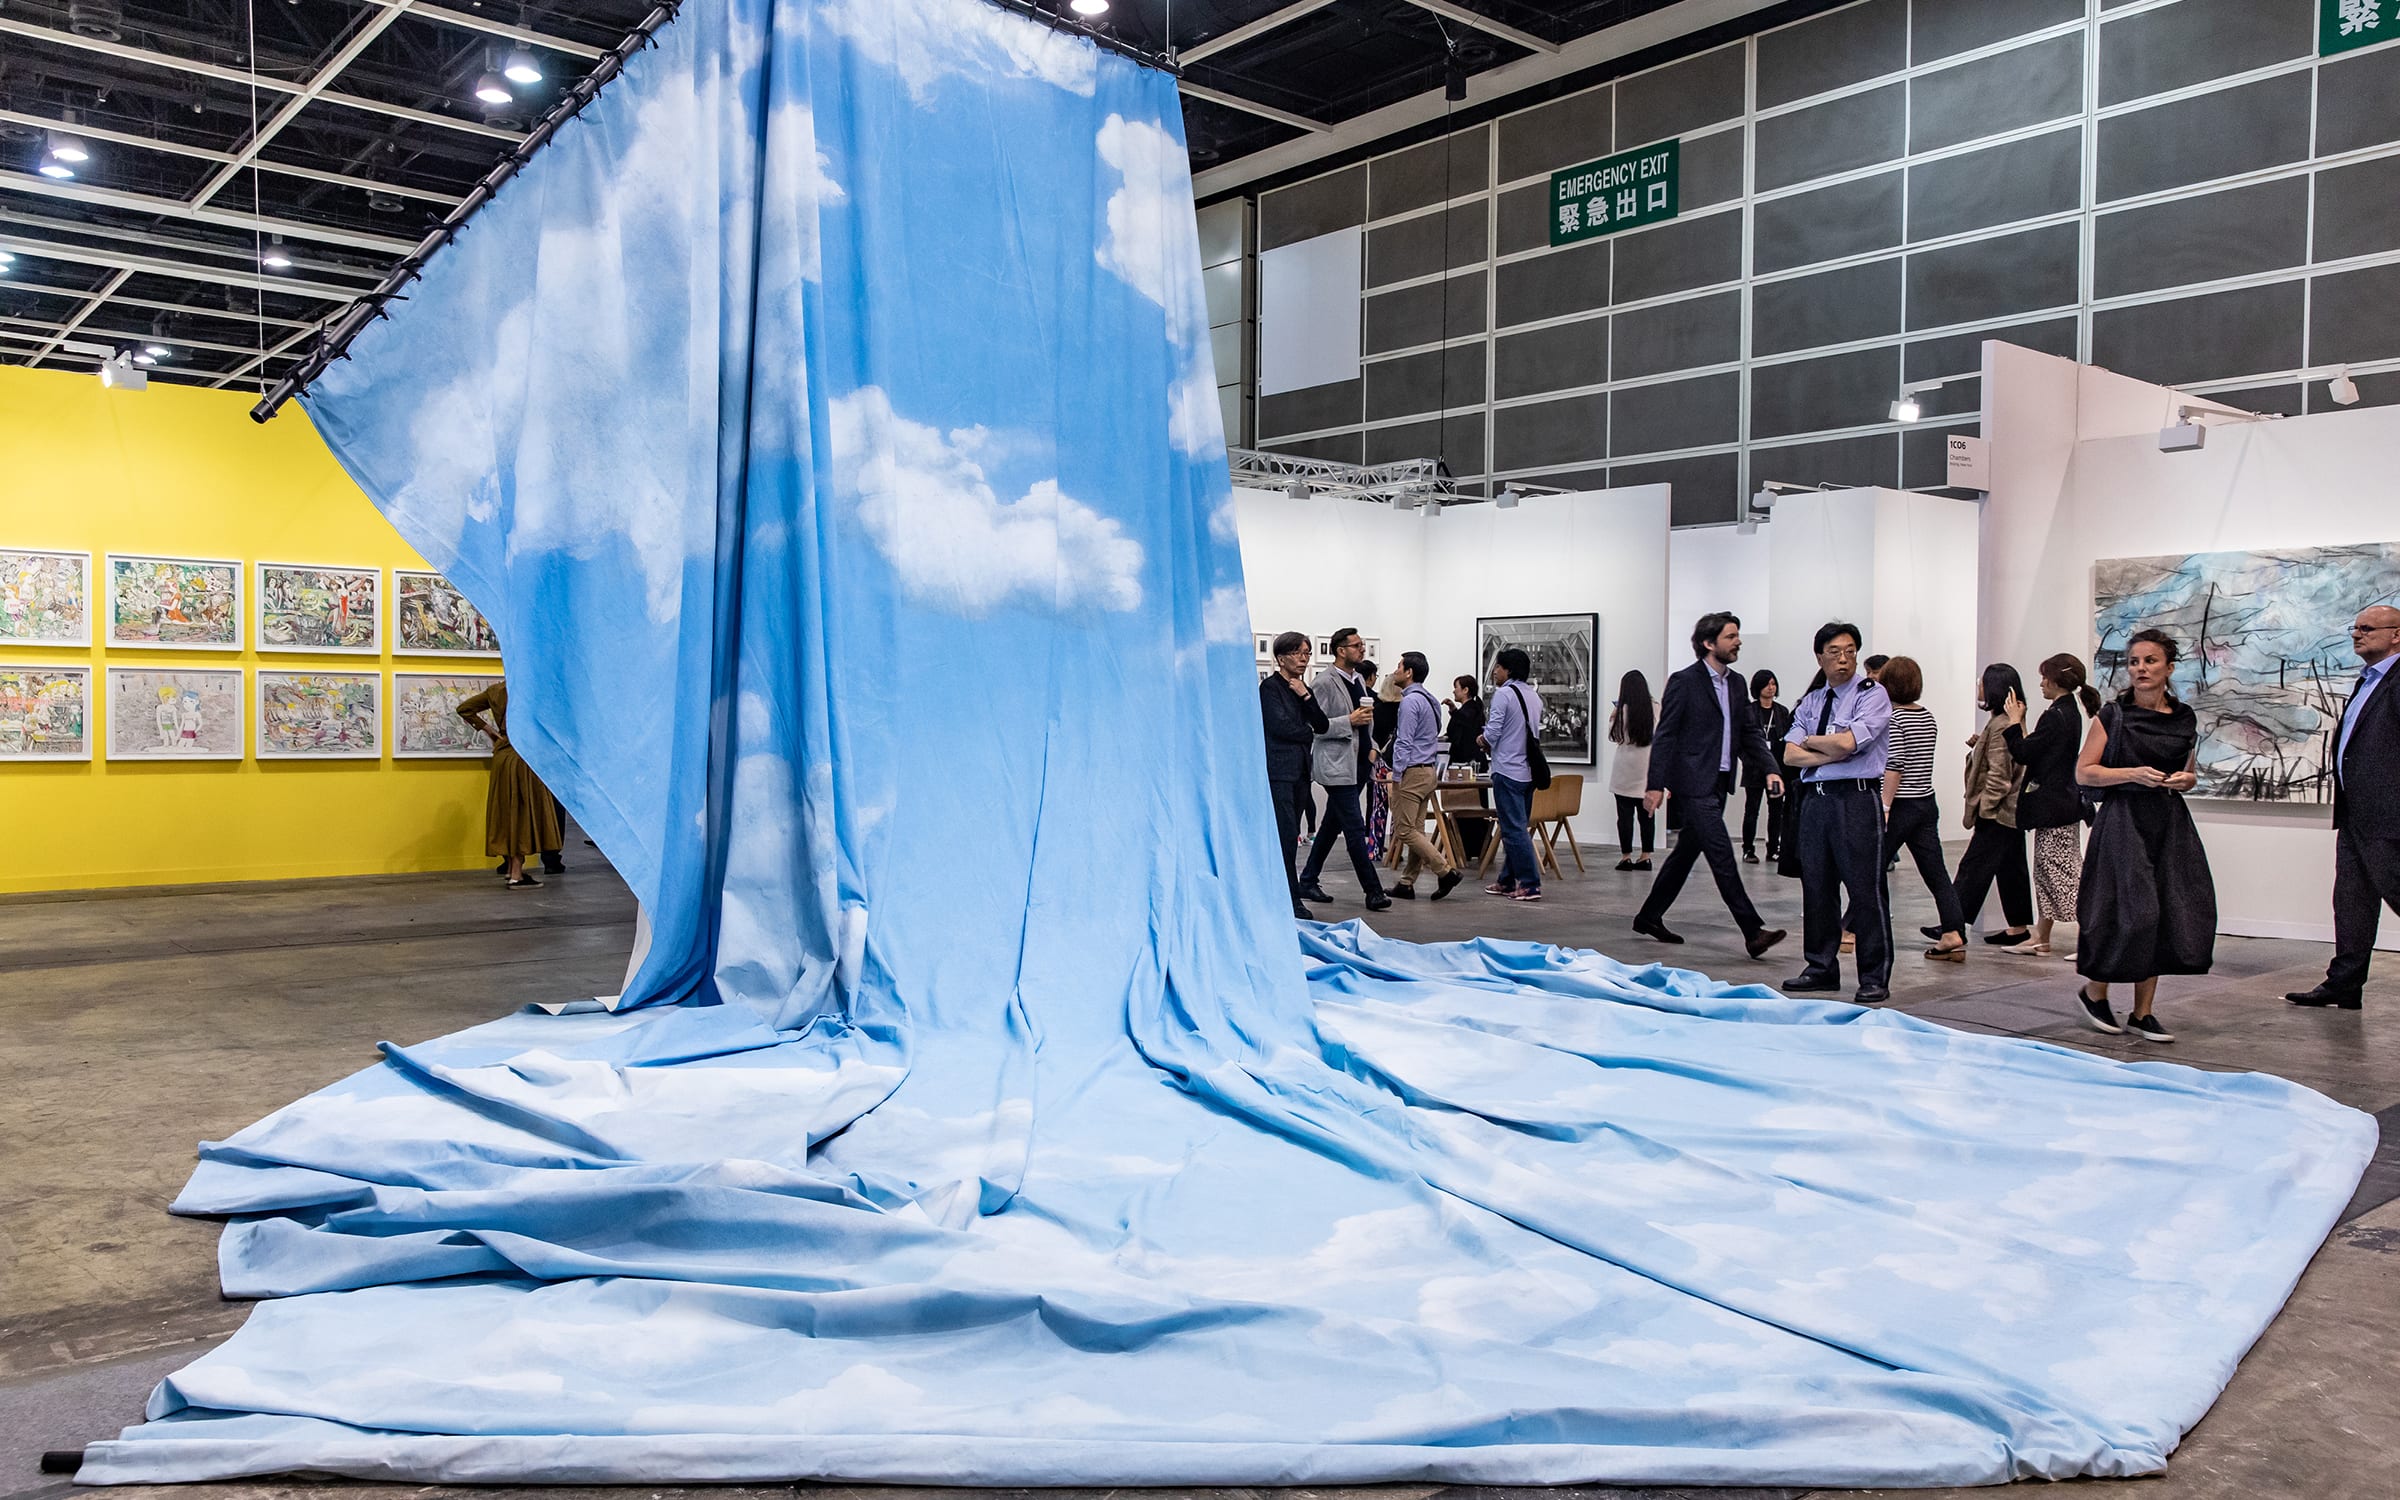 Echakhch's 2014 work La dépossession was presented at Art Basel Hong Kong in 2019, as part of the show's Encounters sector.